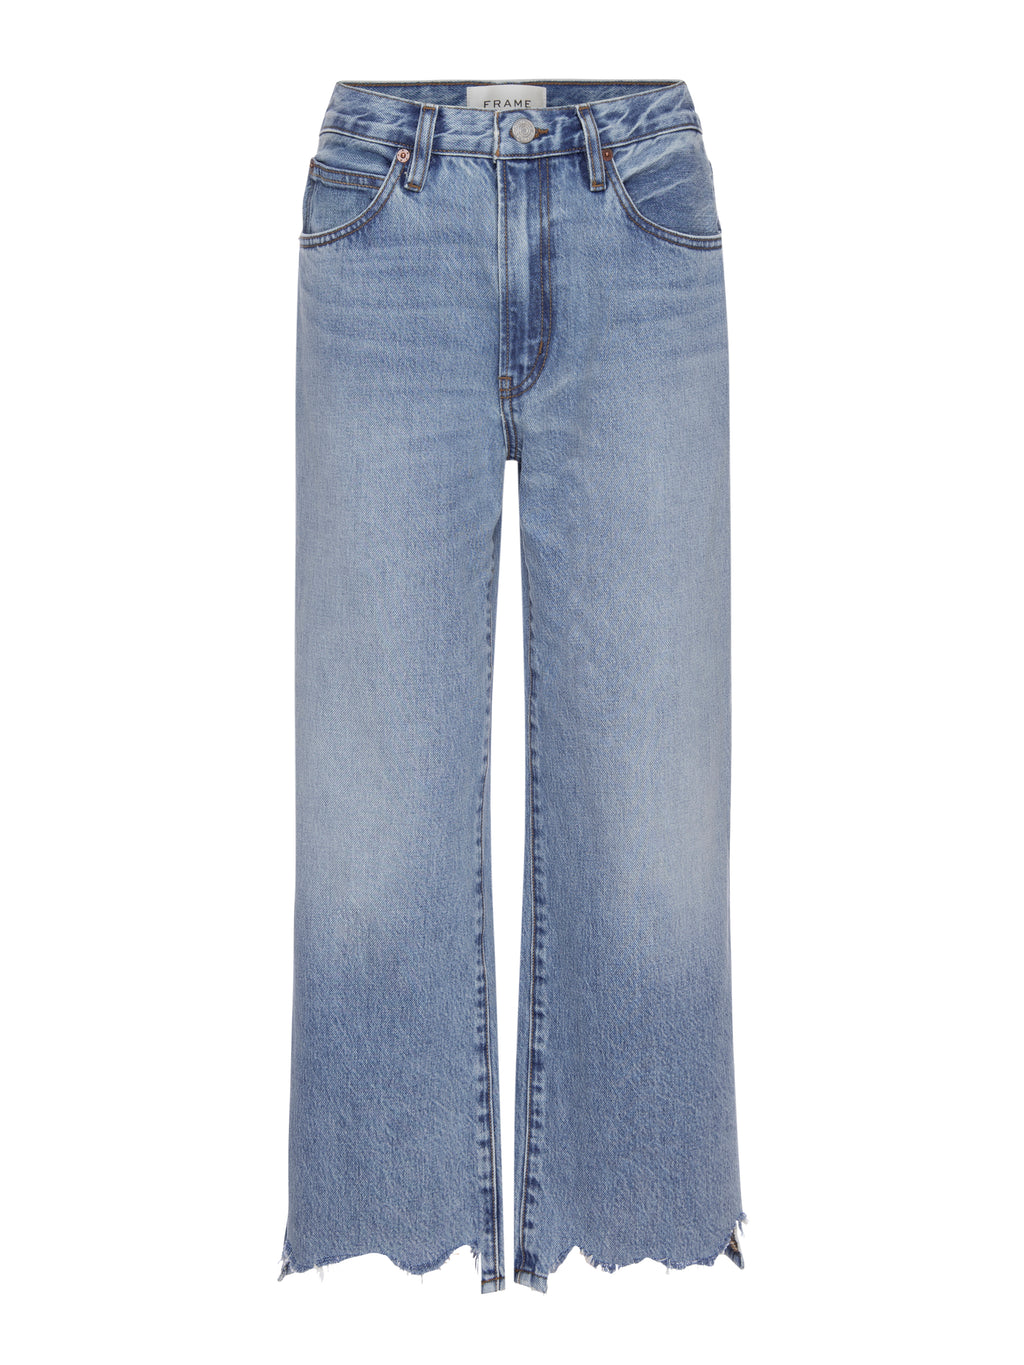 Frame Relaxed Fit Straight Leg Jean in Divine Modern Chew